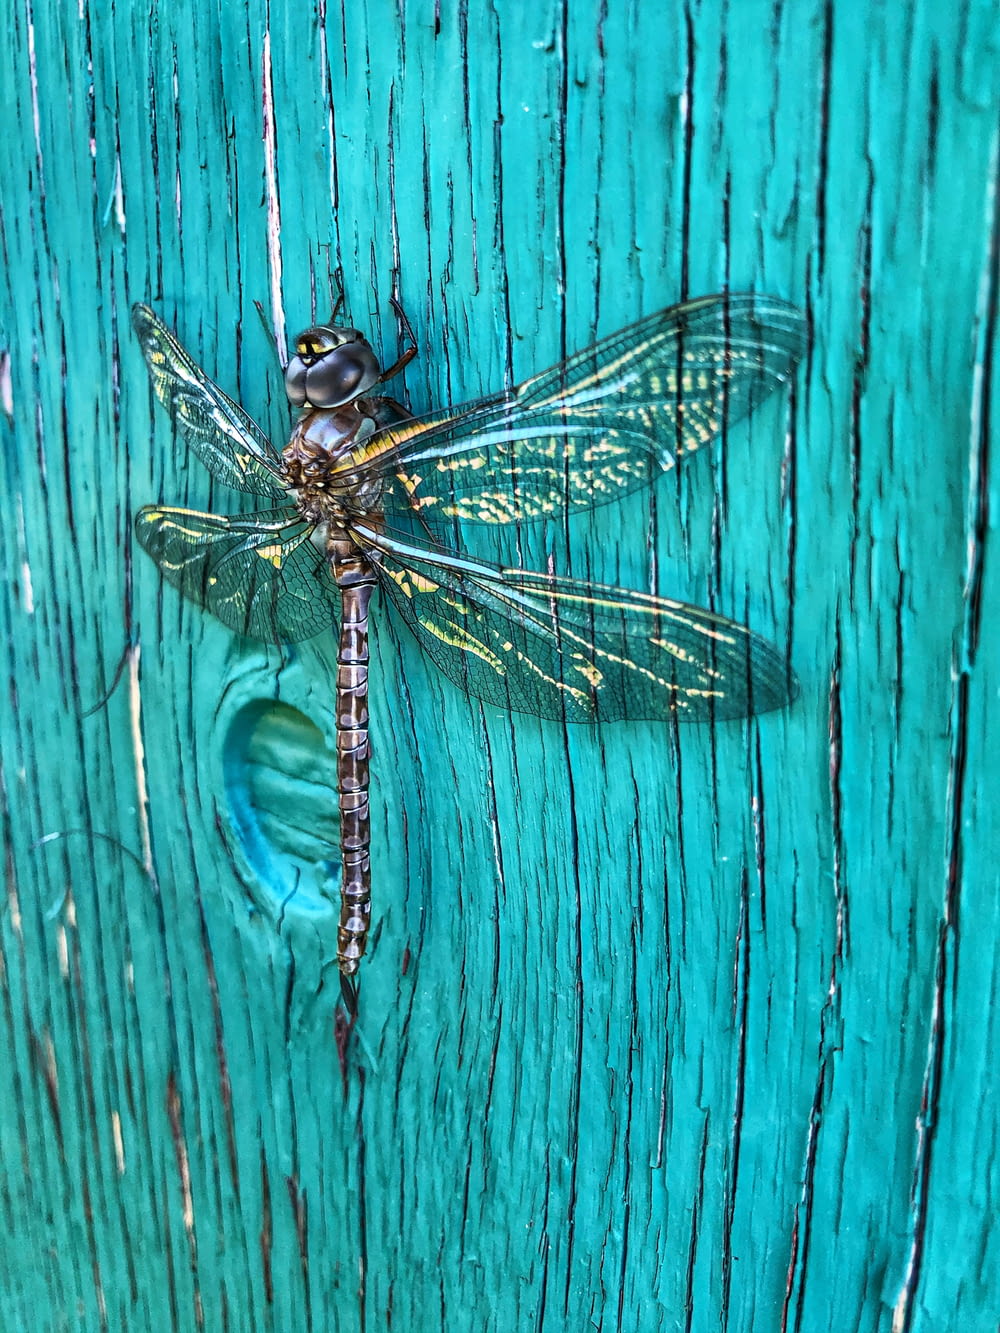 a dragonfly sitting on a wooden surface